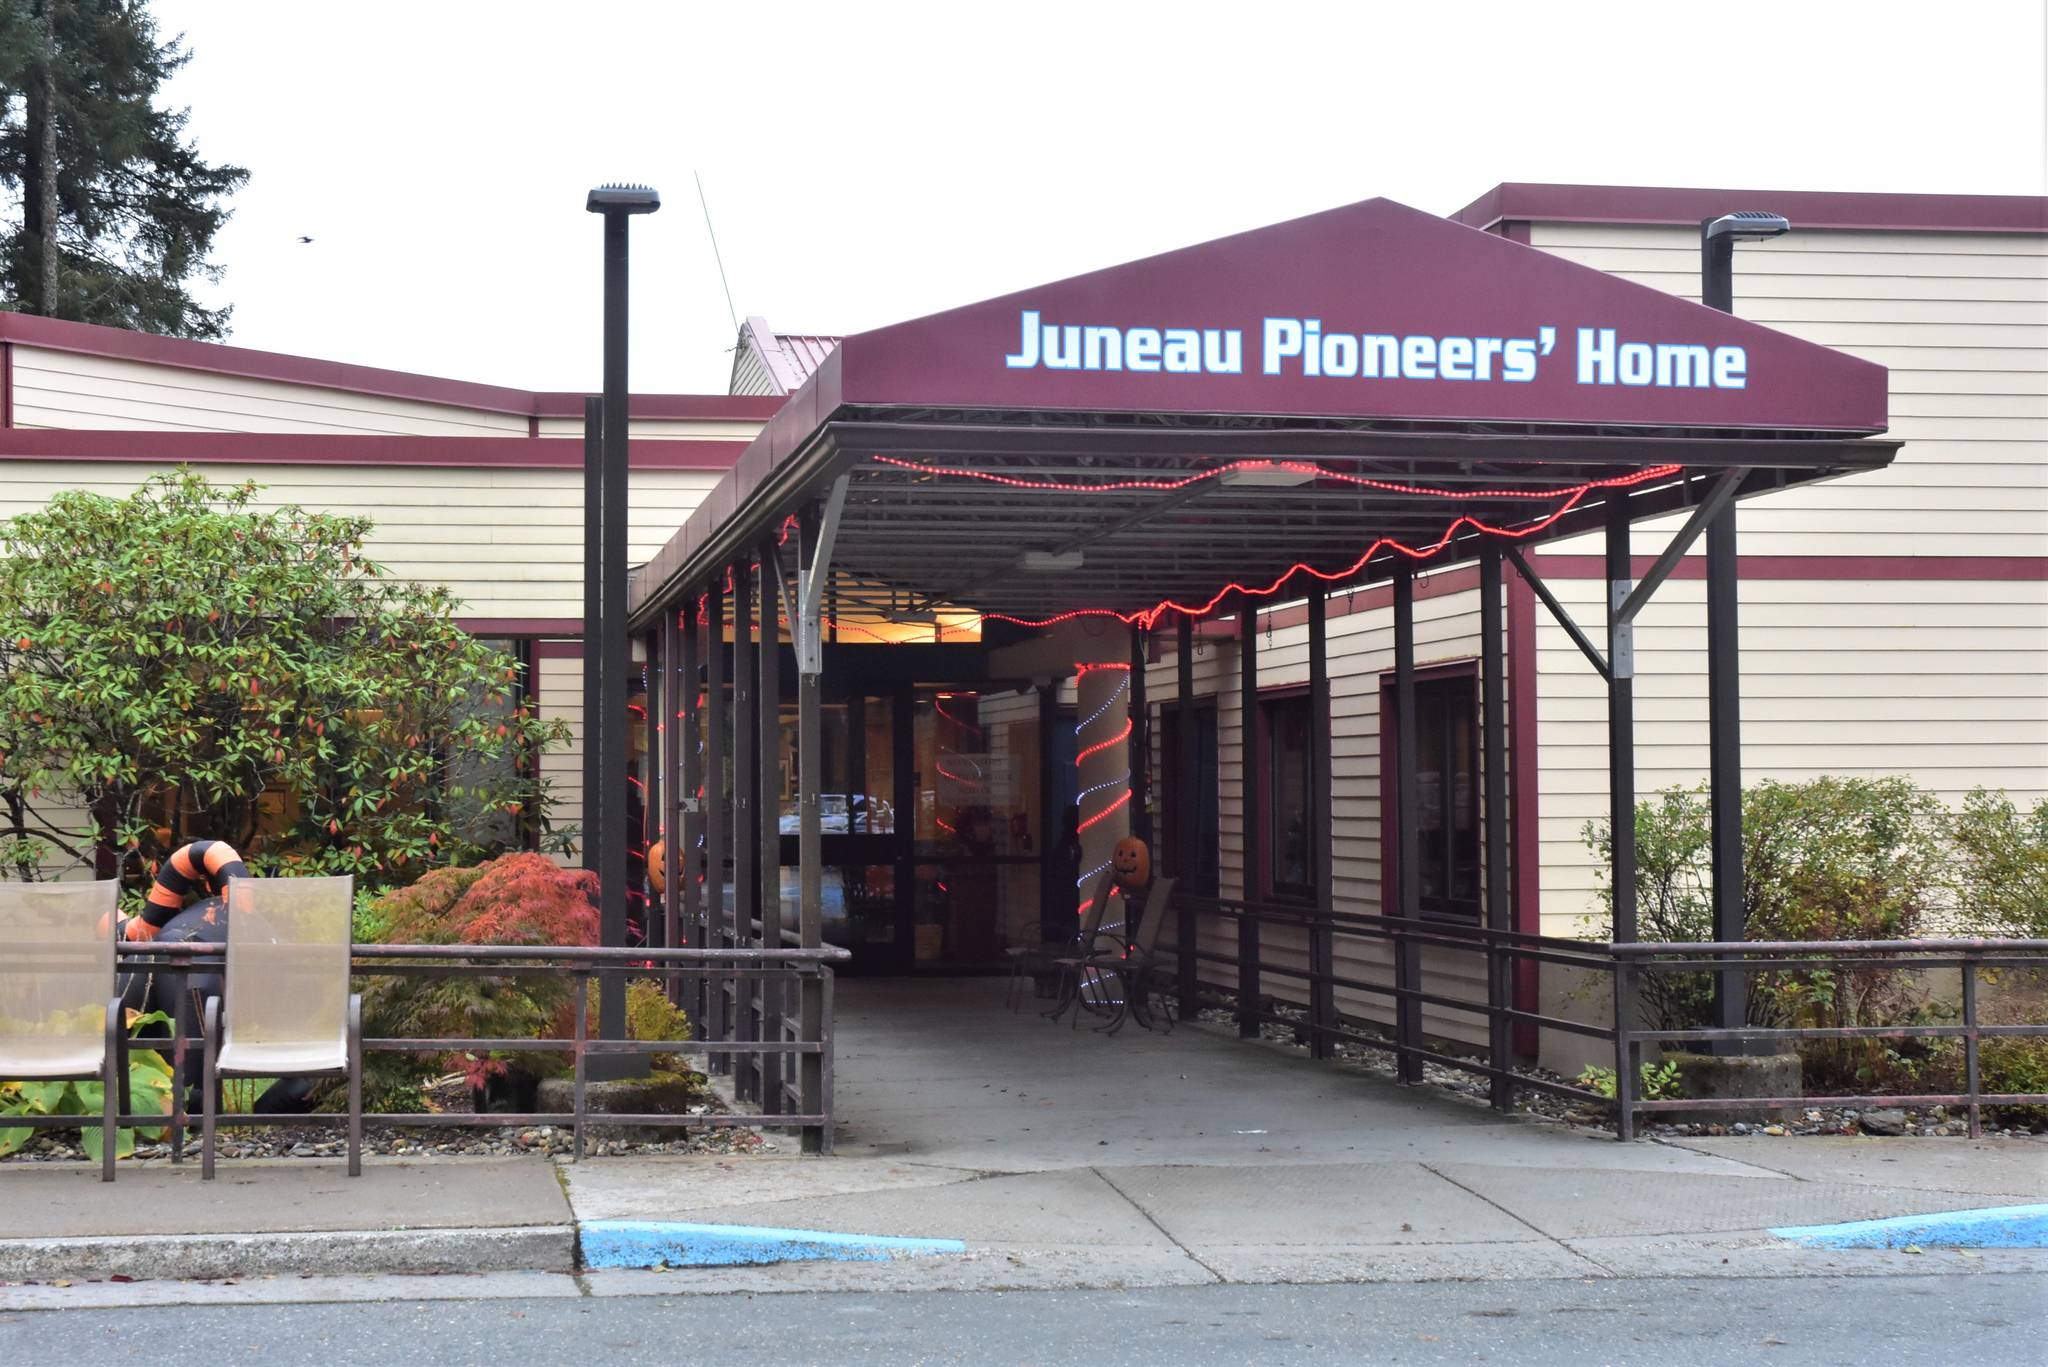 This photo shows the Juneau Pioneer Home on Wednesday, Oct. 7, 2020. Weekly staff testing and vigilance about infection control have kept cases out of the home according to JPH Administrator Gina Del Rosario. (Peter Segall / Juneau Empire)